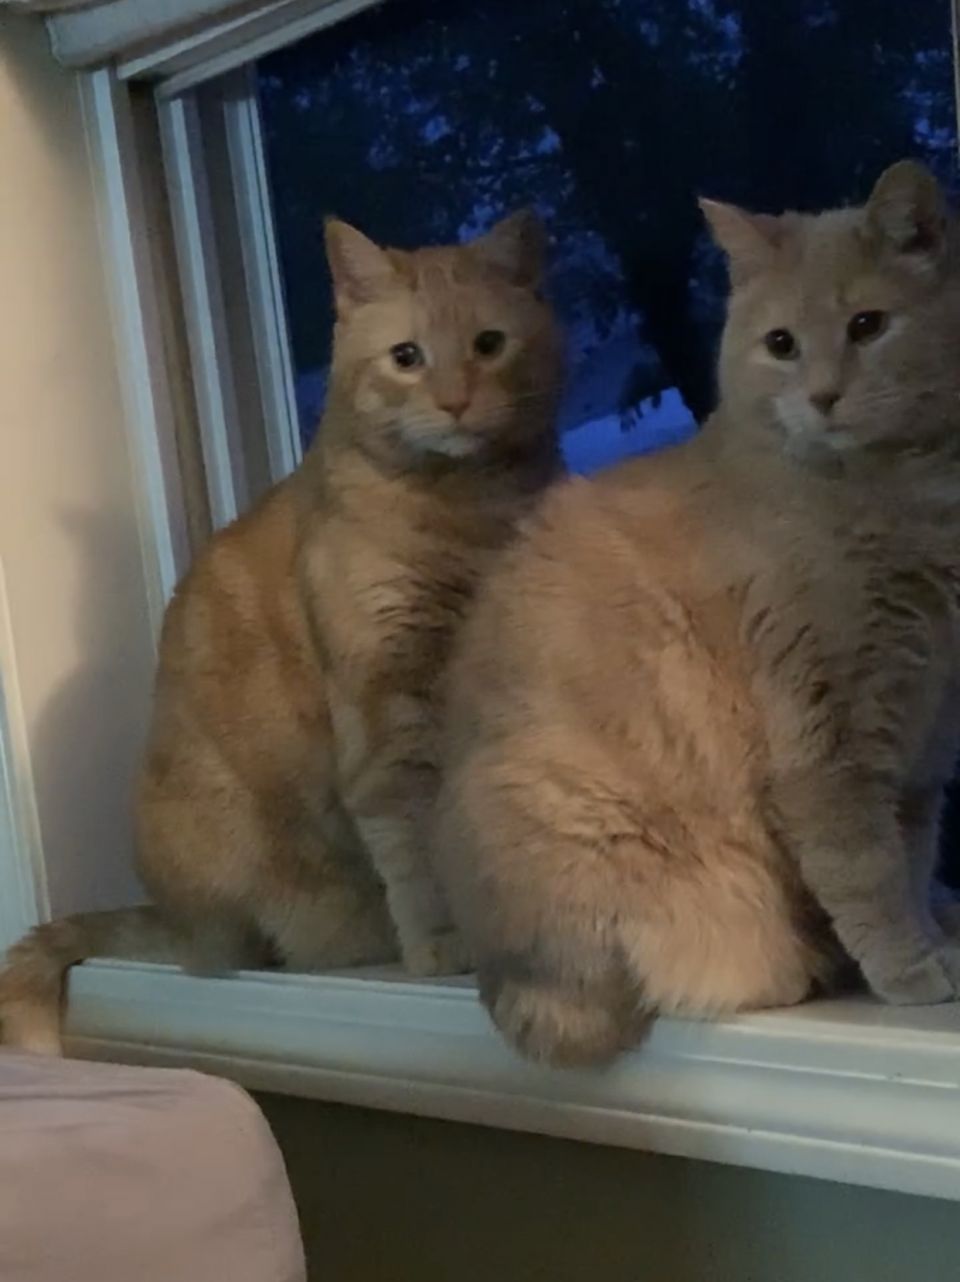 Happy ginger cat day!! Here are our 2 gingers